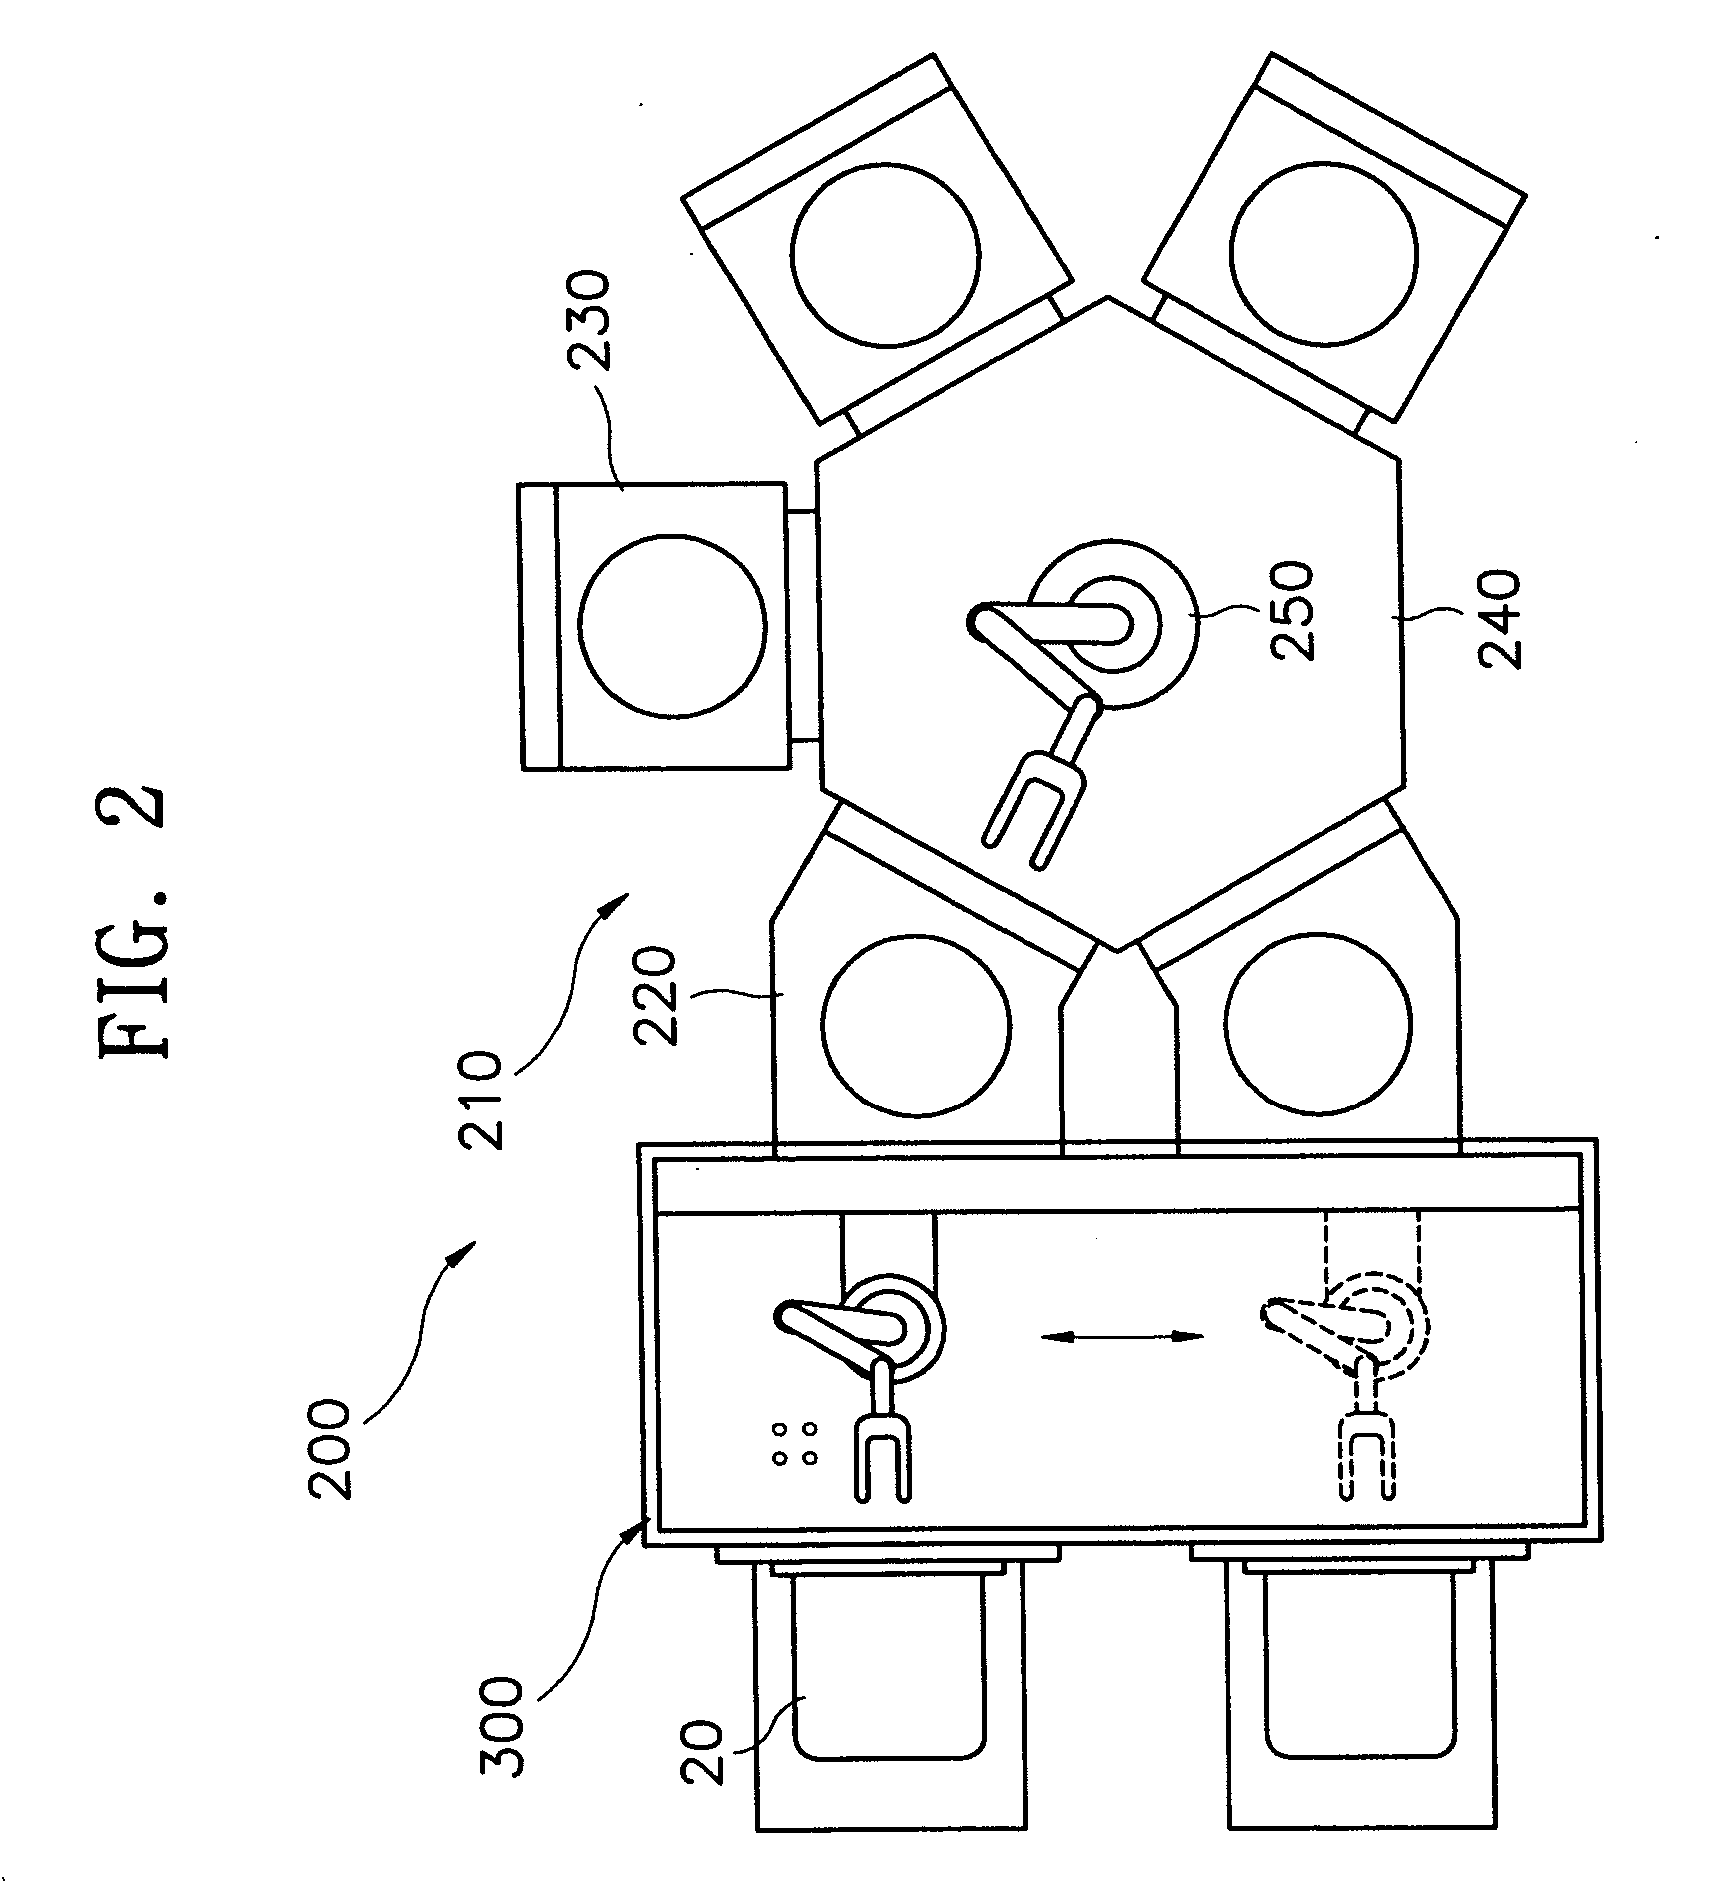 Method of transferring a substrate